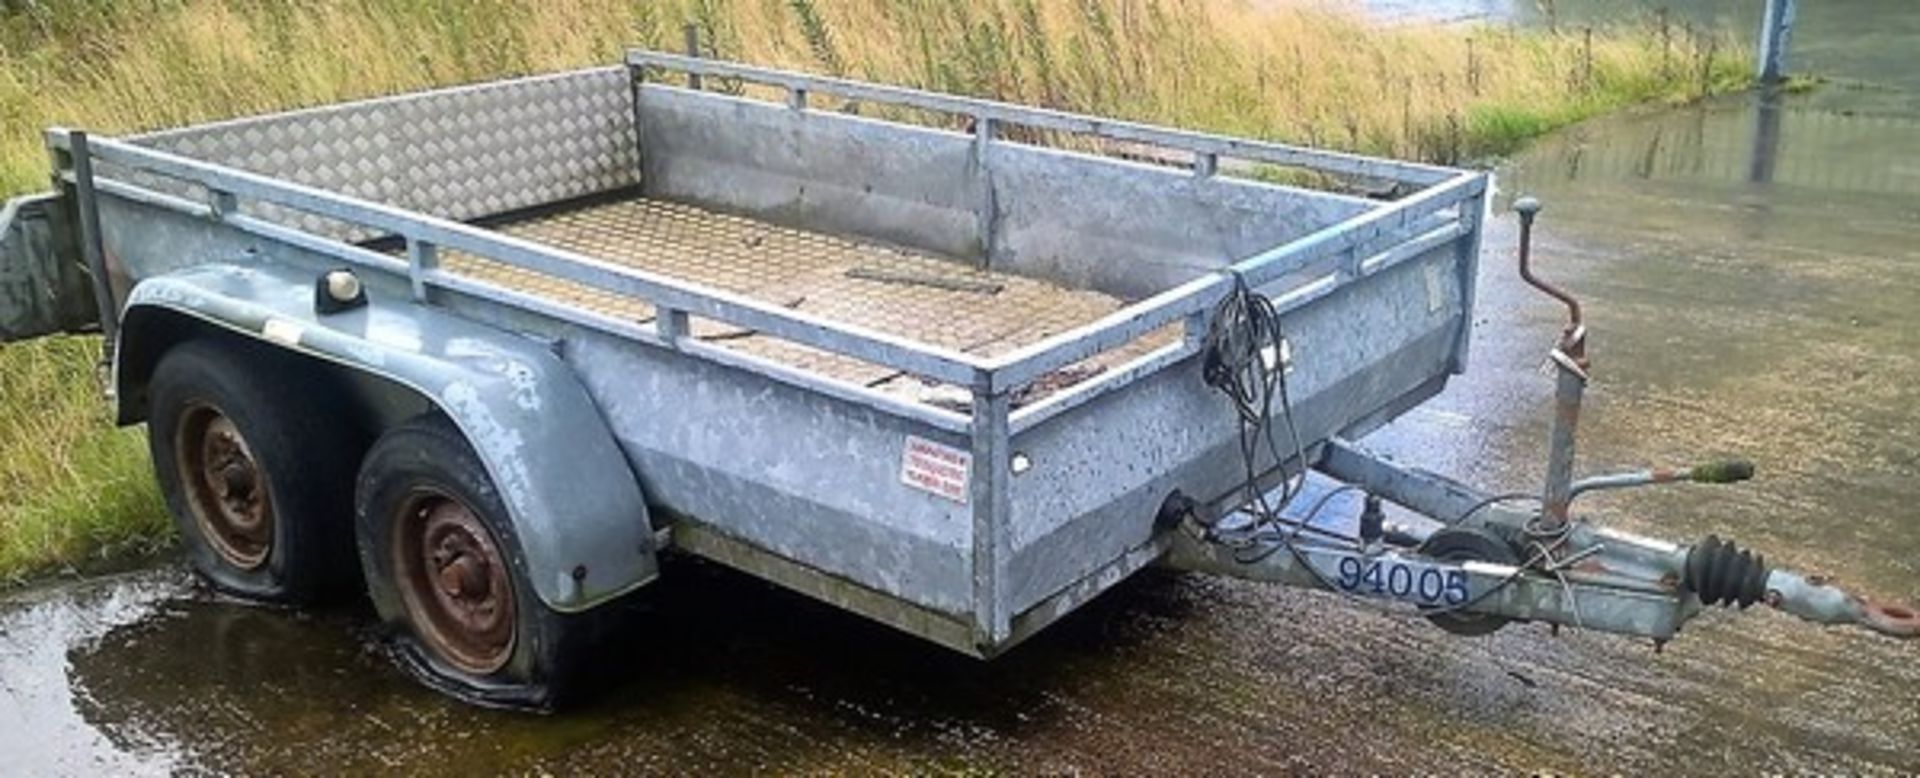 Twin axle trailer c/w aluminium checkerplate floor. Pl No SCW94005. **To be sold from Errol auction